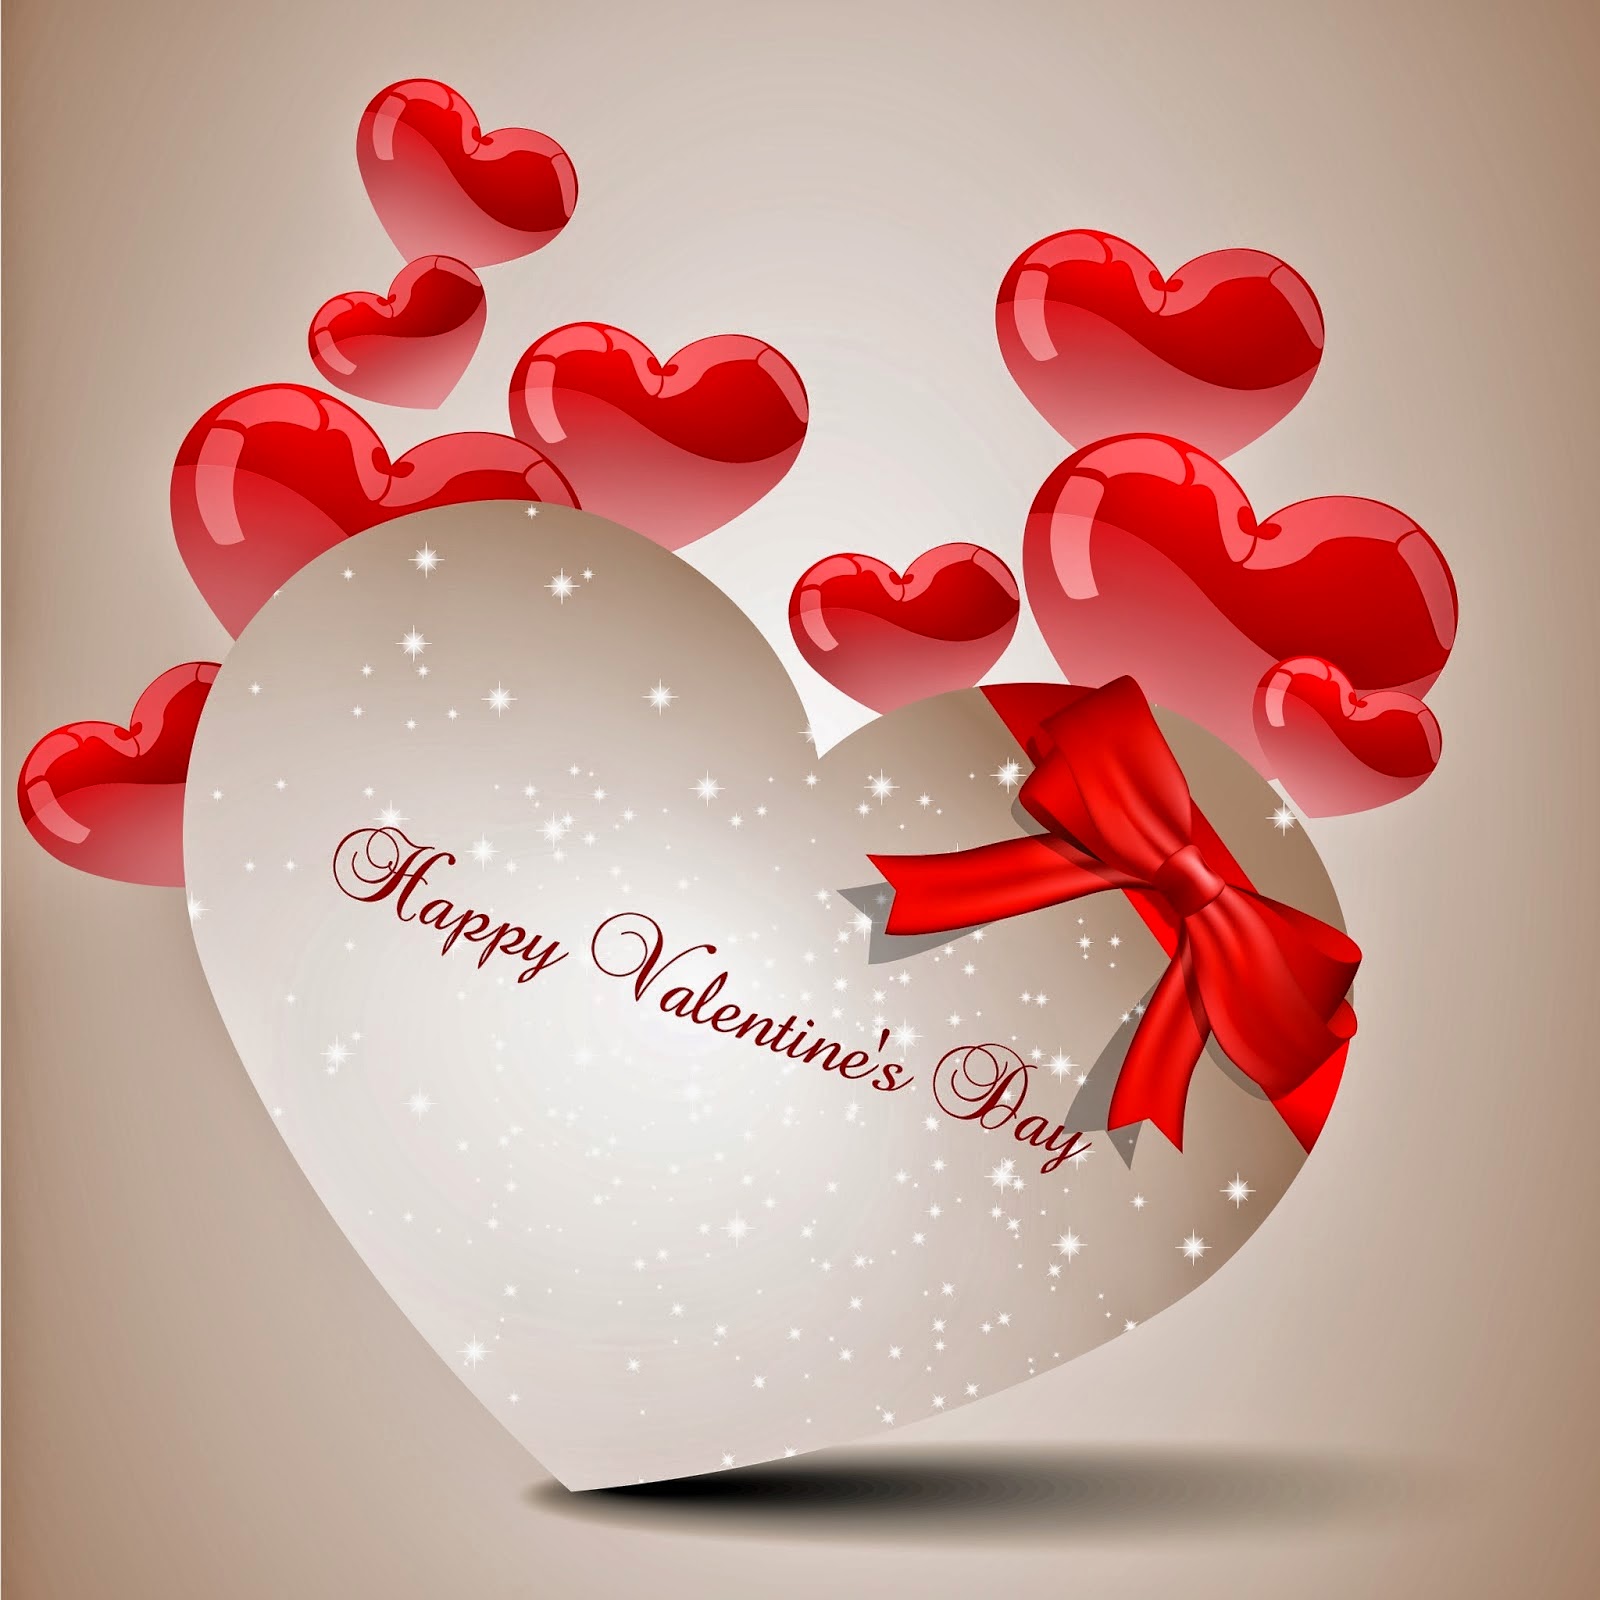 Best Valentine Day Wallpaper For Profile